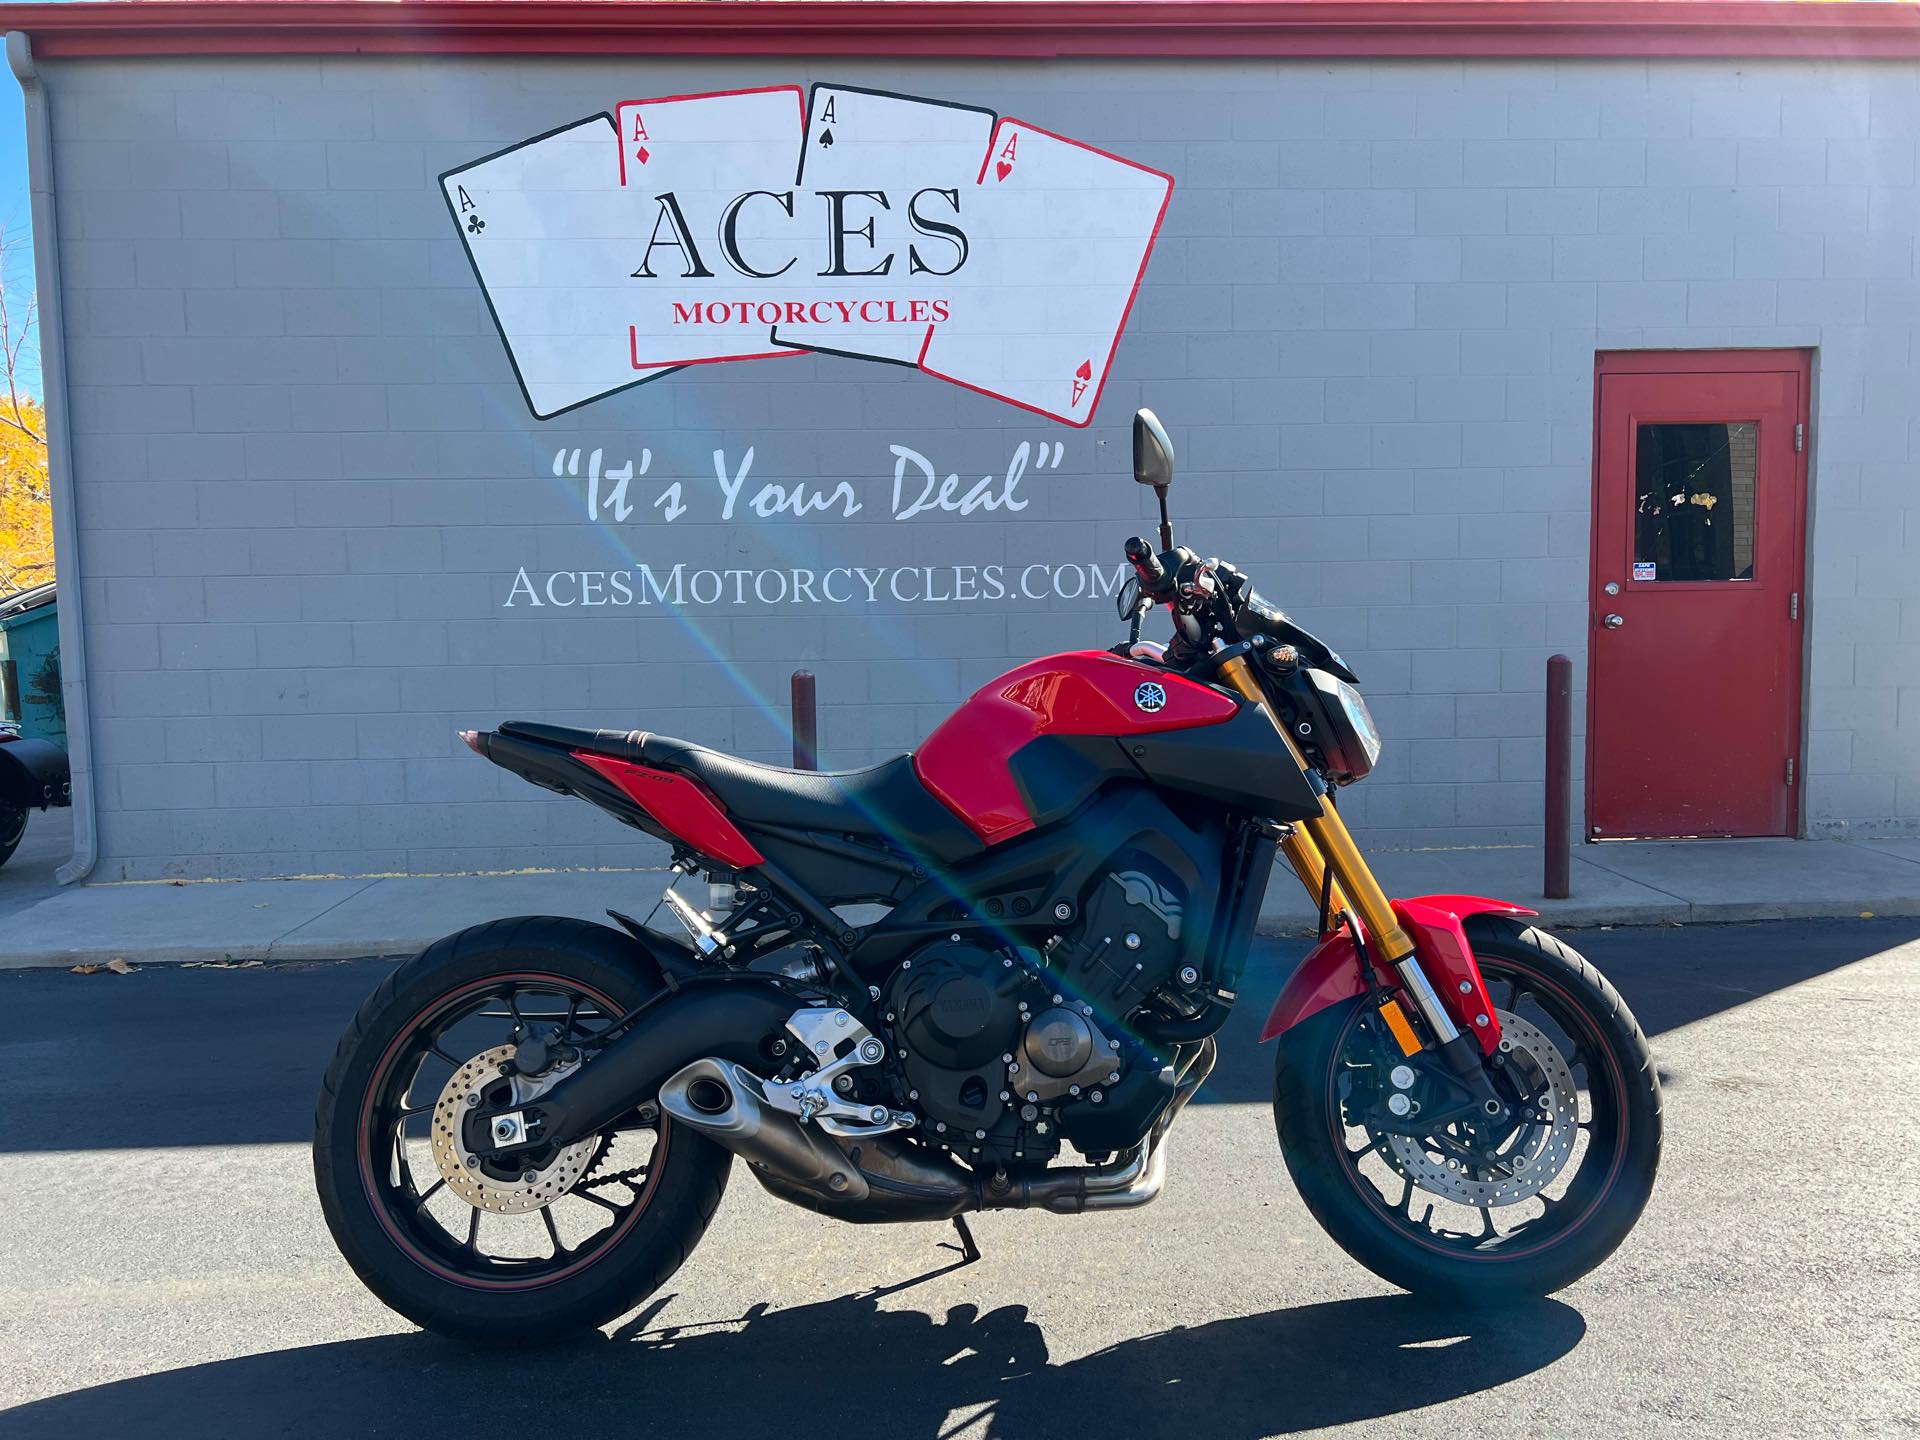 2014 Yamaha FZ 09 at Aces Motorcycles - Fort Collins